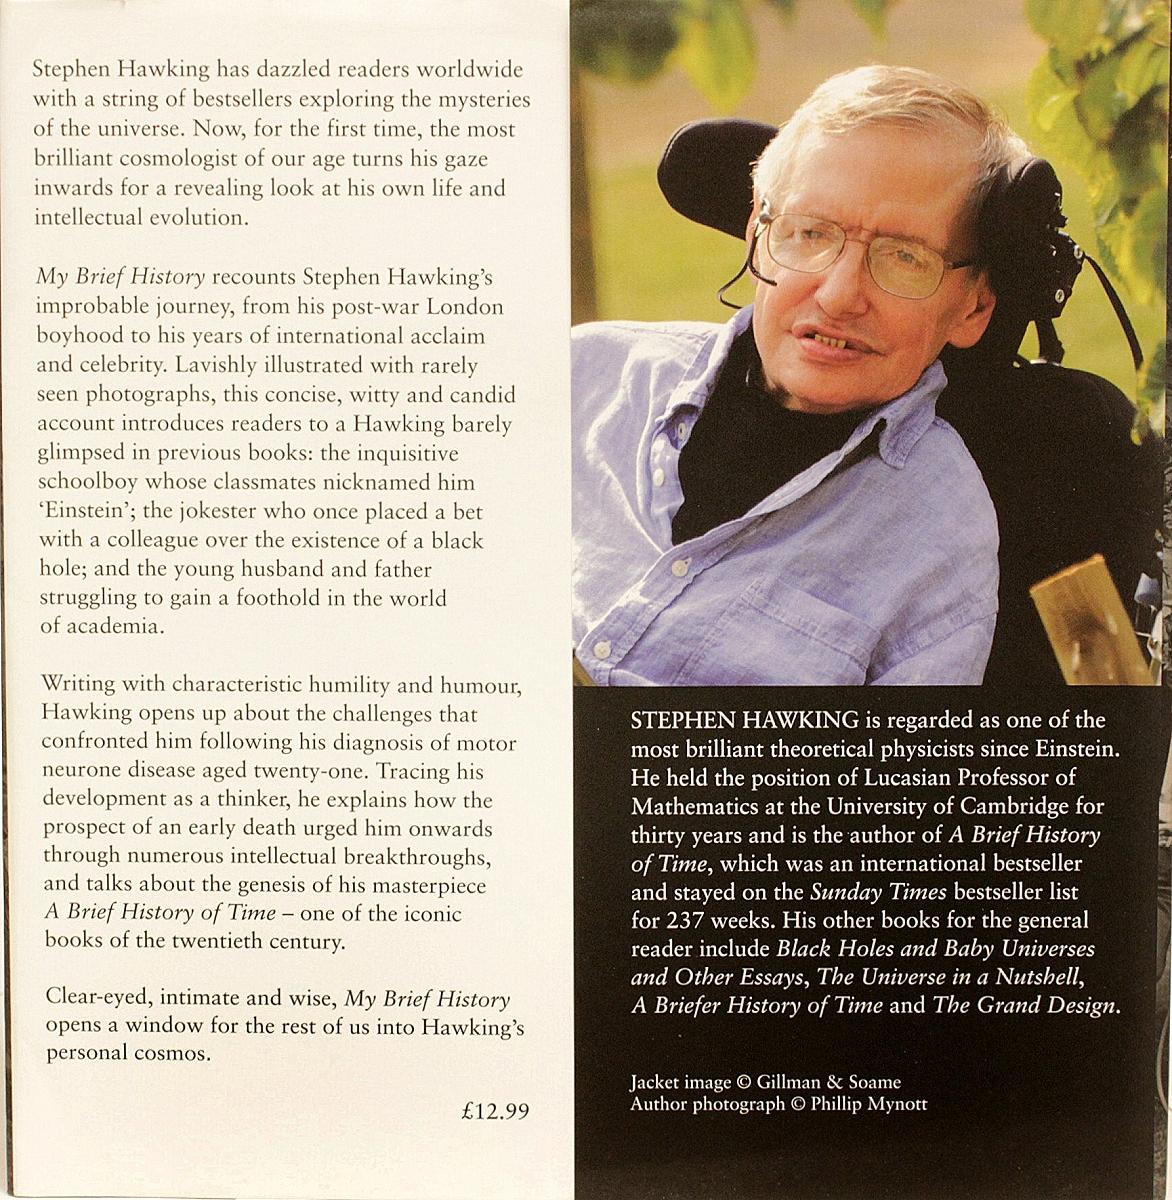 Fabric Stephen Hawking, My Brief History, 1st Ed Signed with Thumb Print of Hawking For Sale